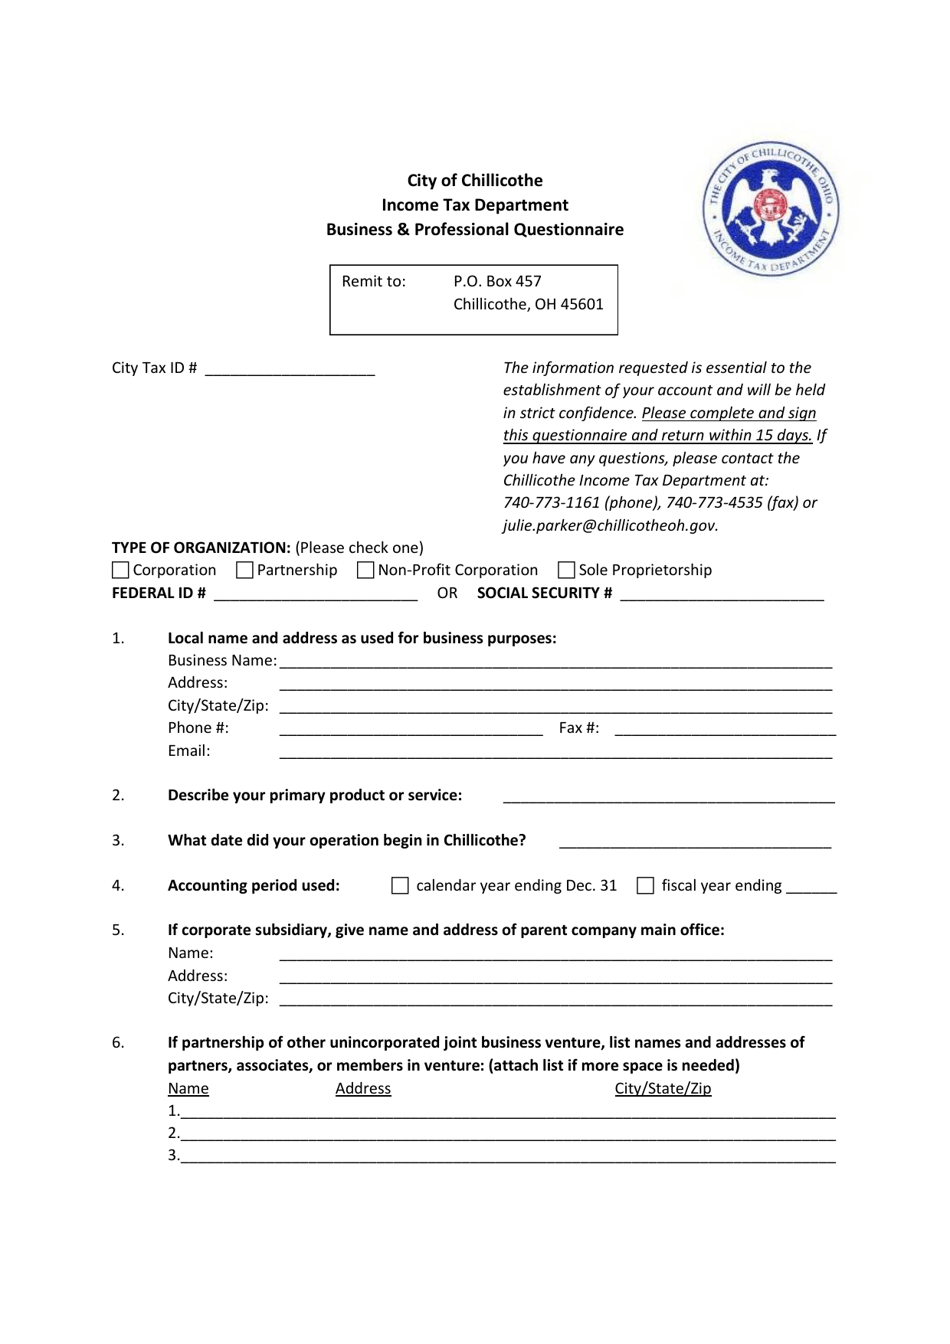 Business  Professional Questionnaire - City of Chillicothe, Ohio, Page 1